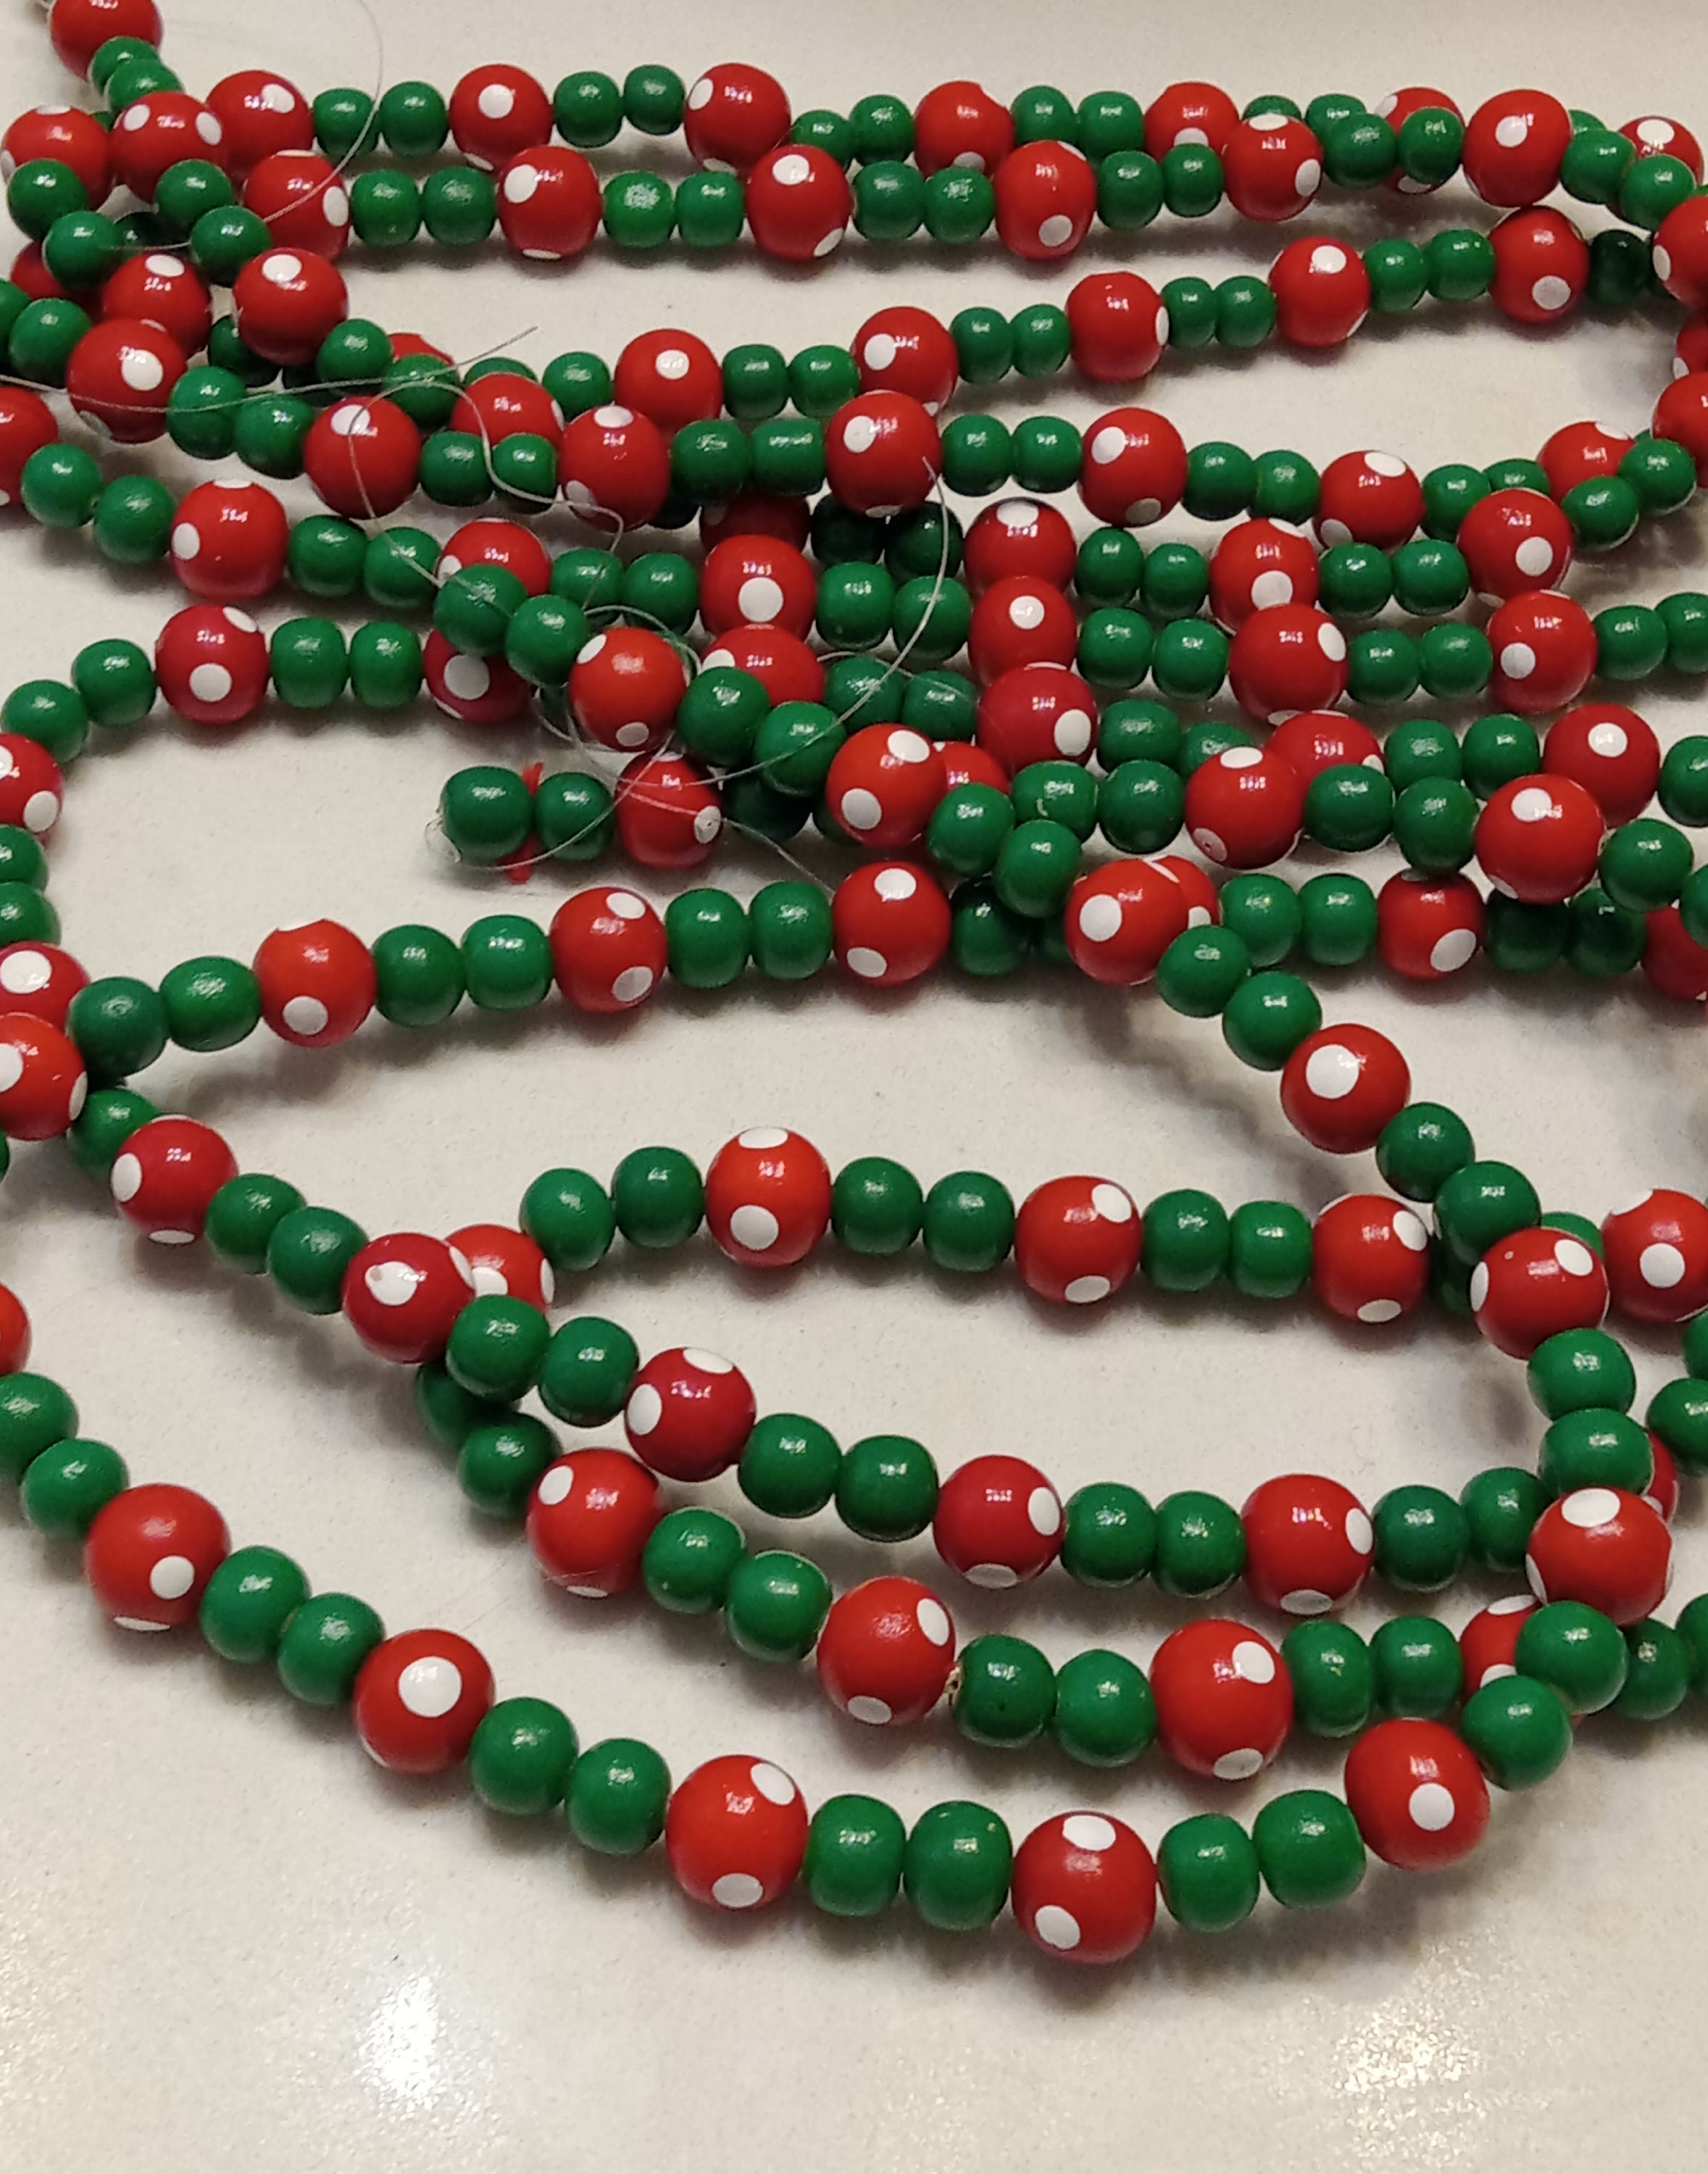 7-Foot Rustic Bright Red, White and Green Wood Bead Garland Christmas Tree Decoration - Decorative Vintage Style Wooden Beads for Everyday Country